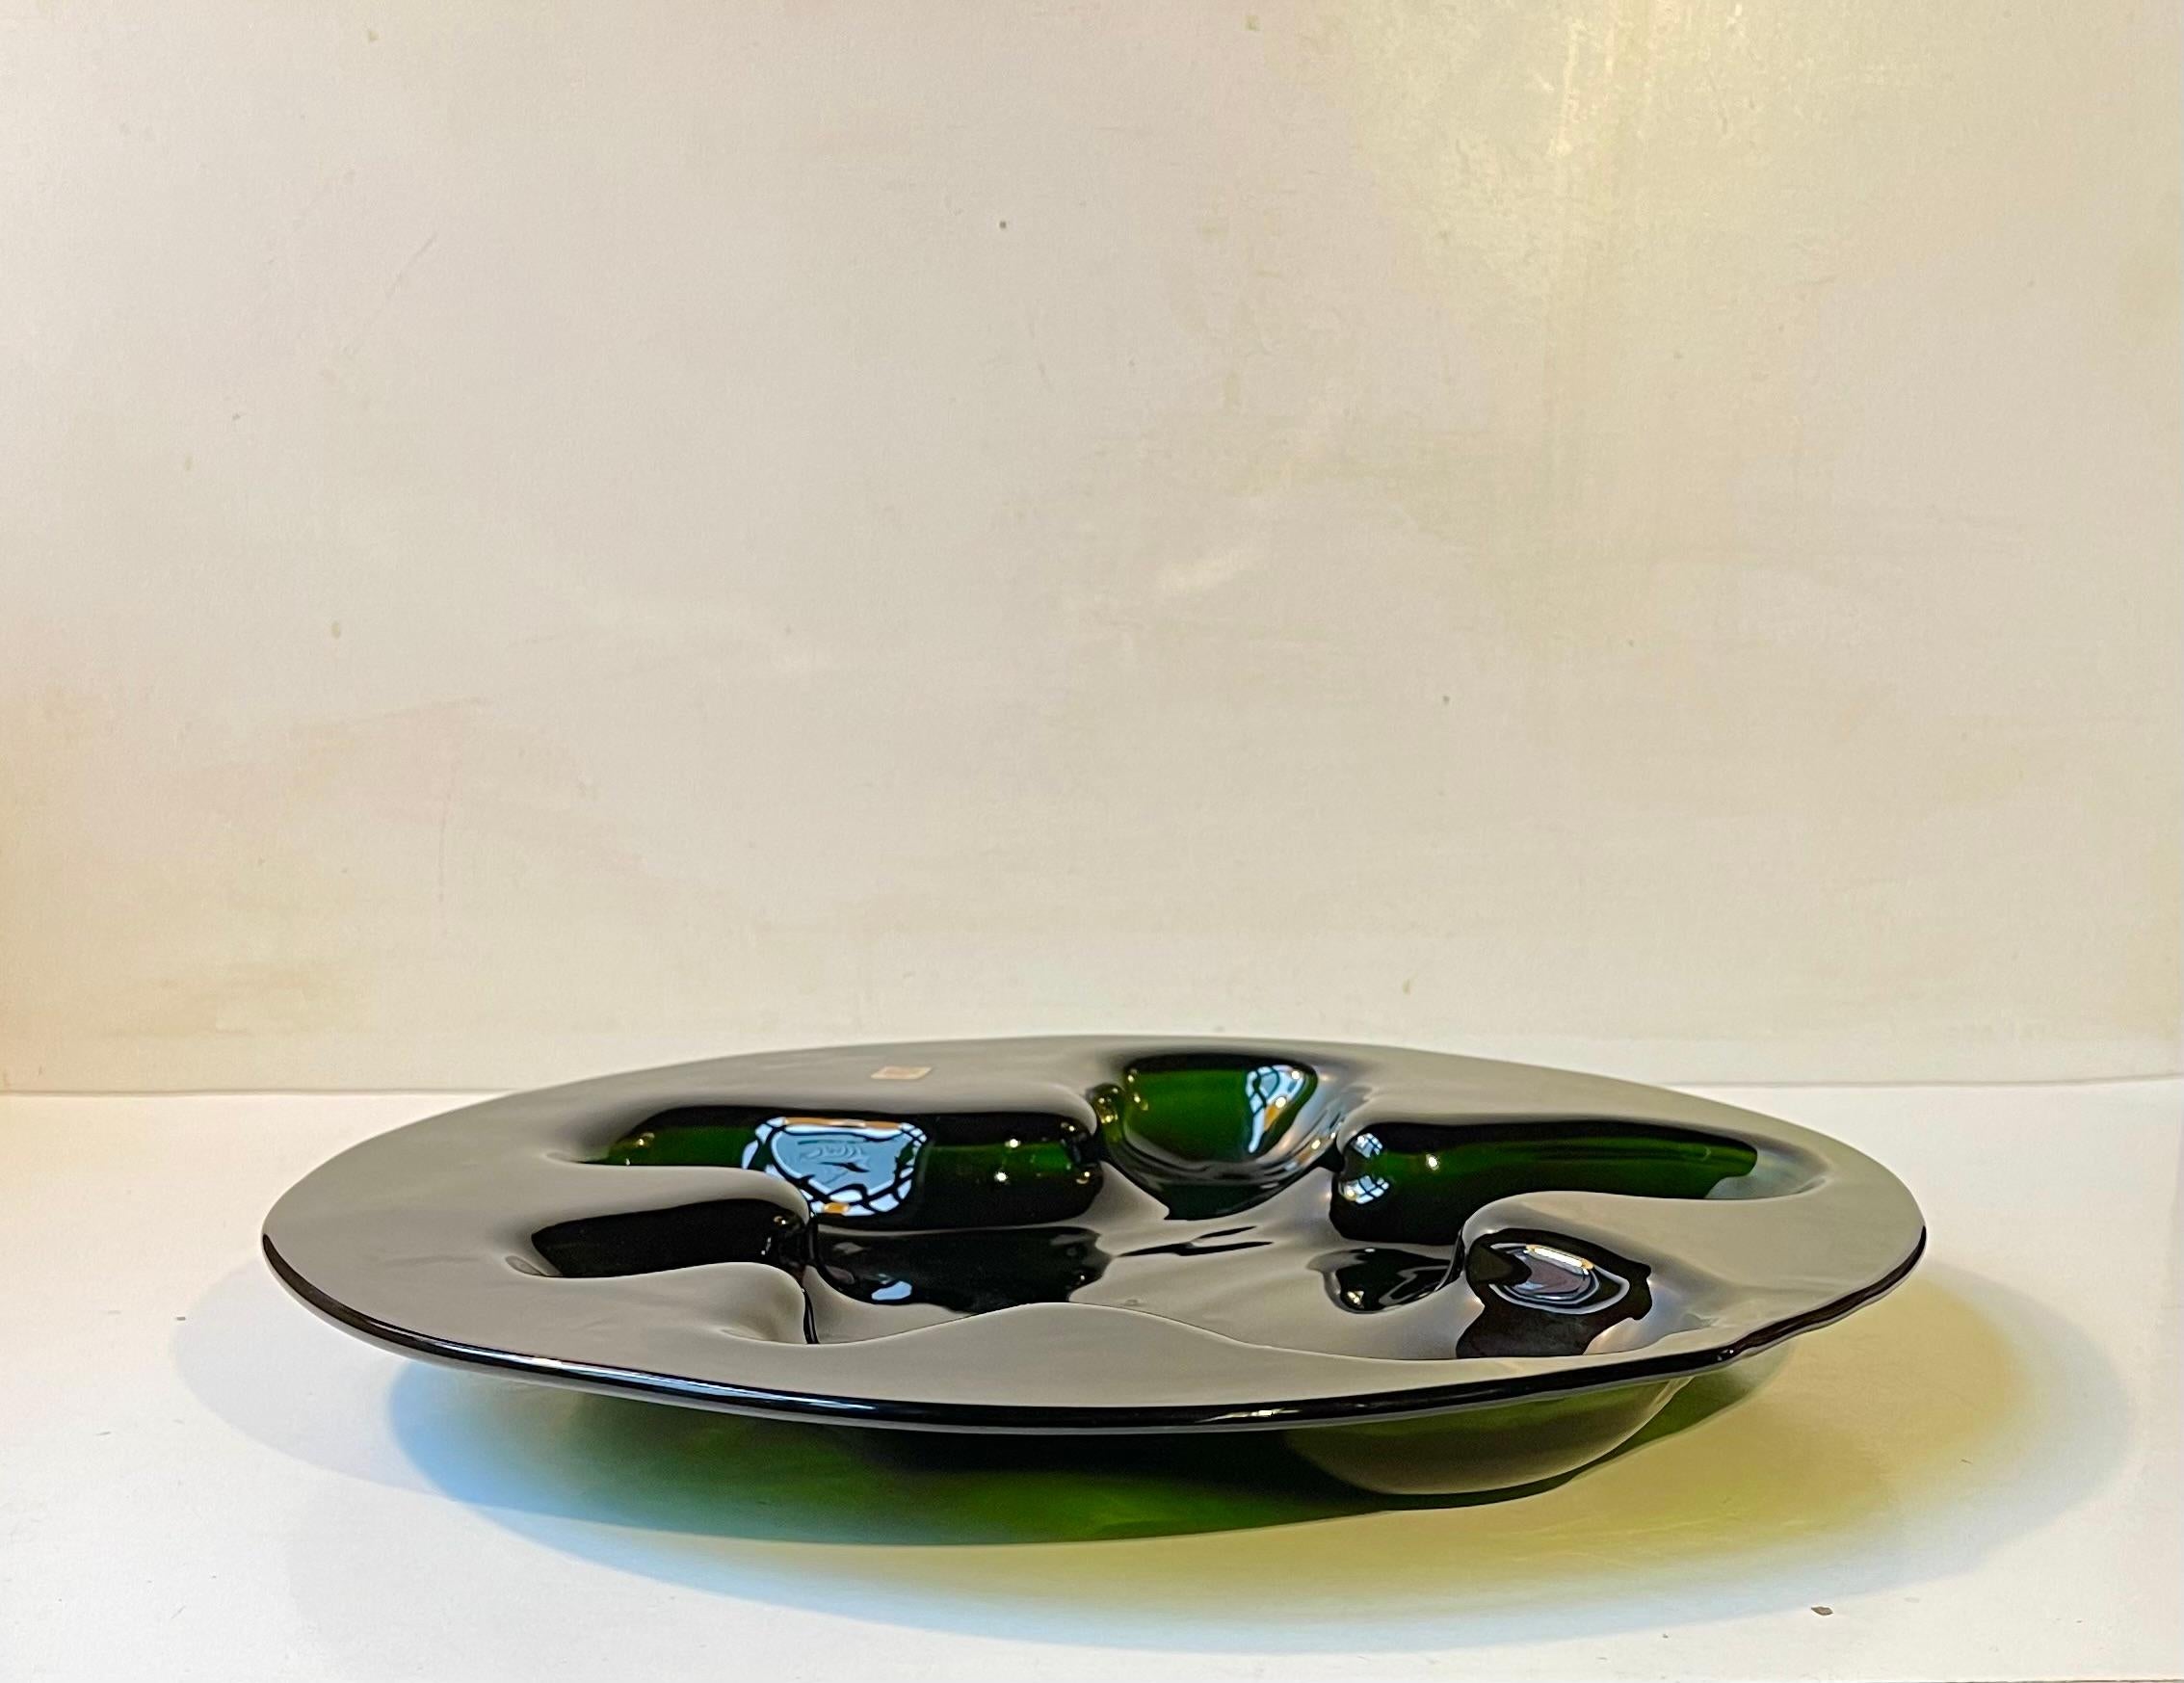 The largest ikebana flower arrangement dish from Holmegaard. Its color is called jade green and it features a connected 6 compartment abstract motif. Designed and blown by Michael Bang during the early-mid 1970s. 

Measurements: D: 36/34.5 cm,